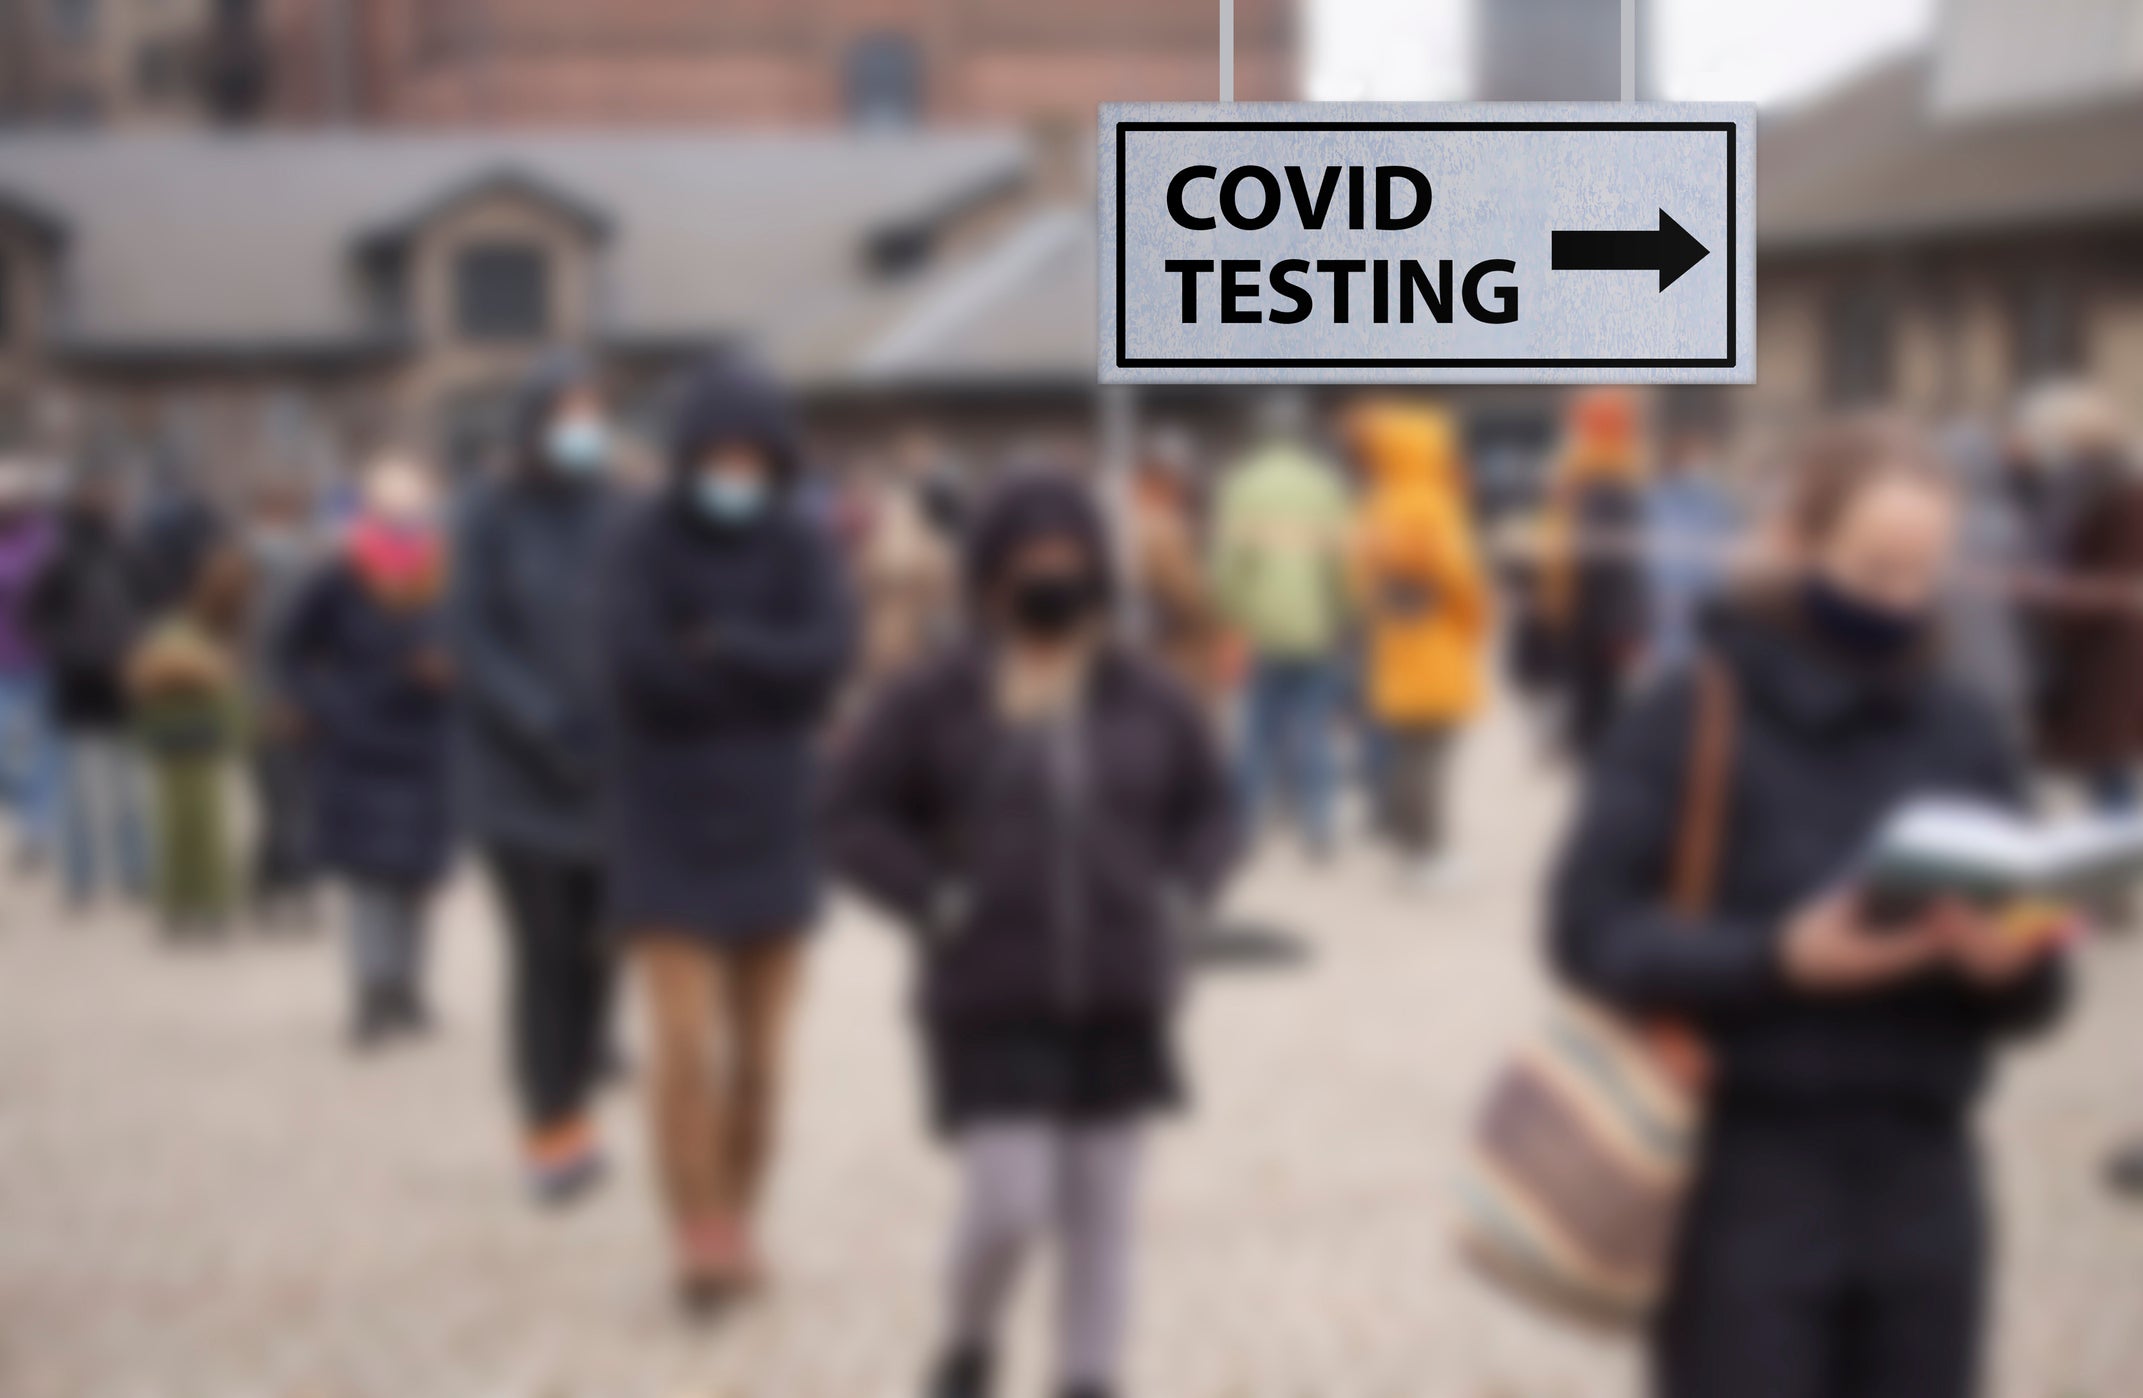 Line of people outside wearing face masks and winter coats. Sign with arrow reads: COVID TESTING.